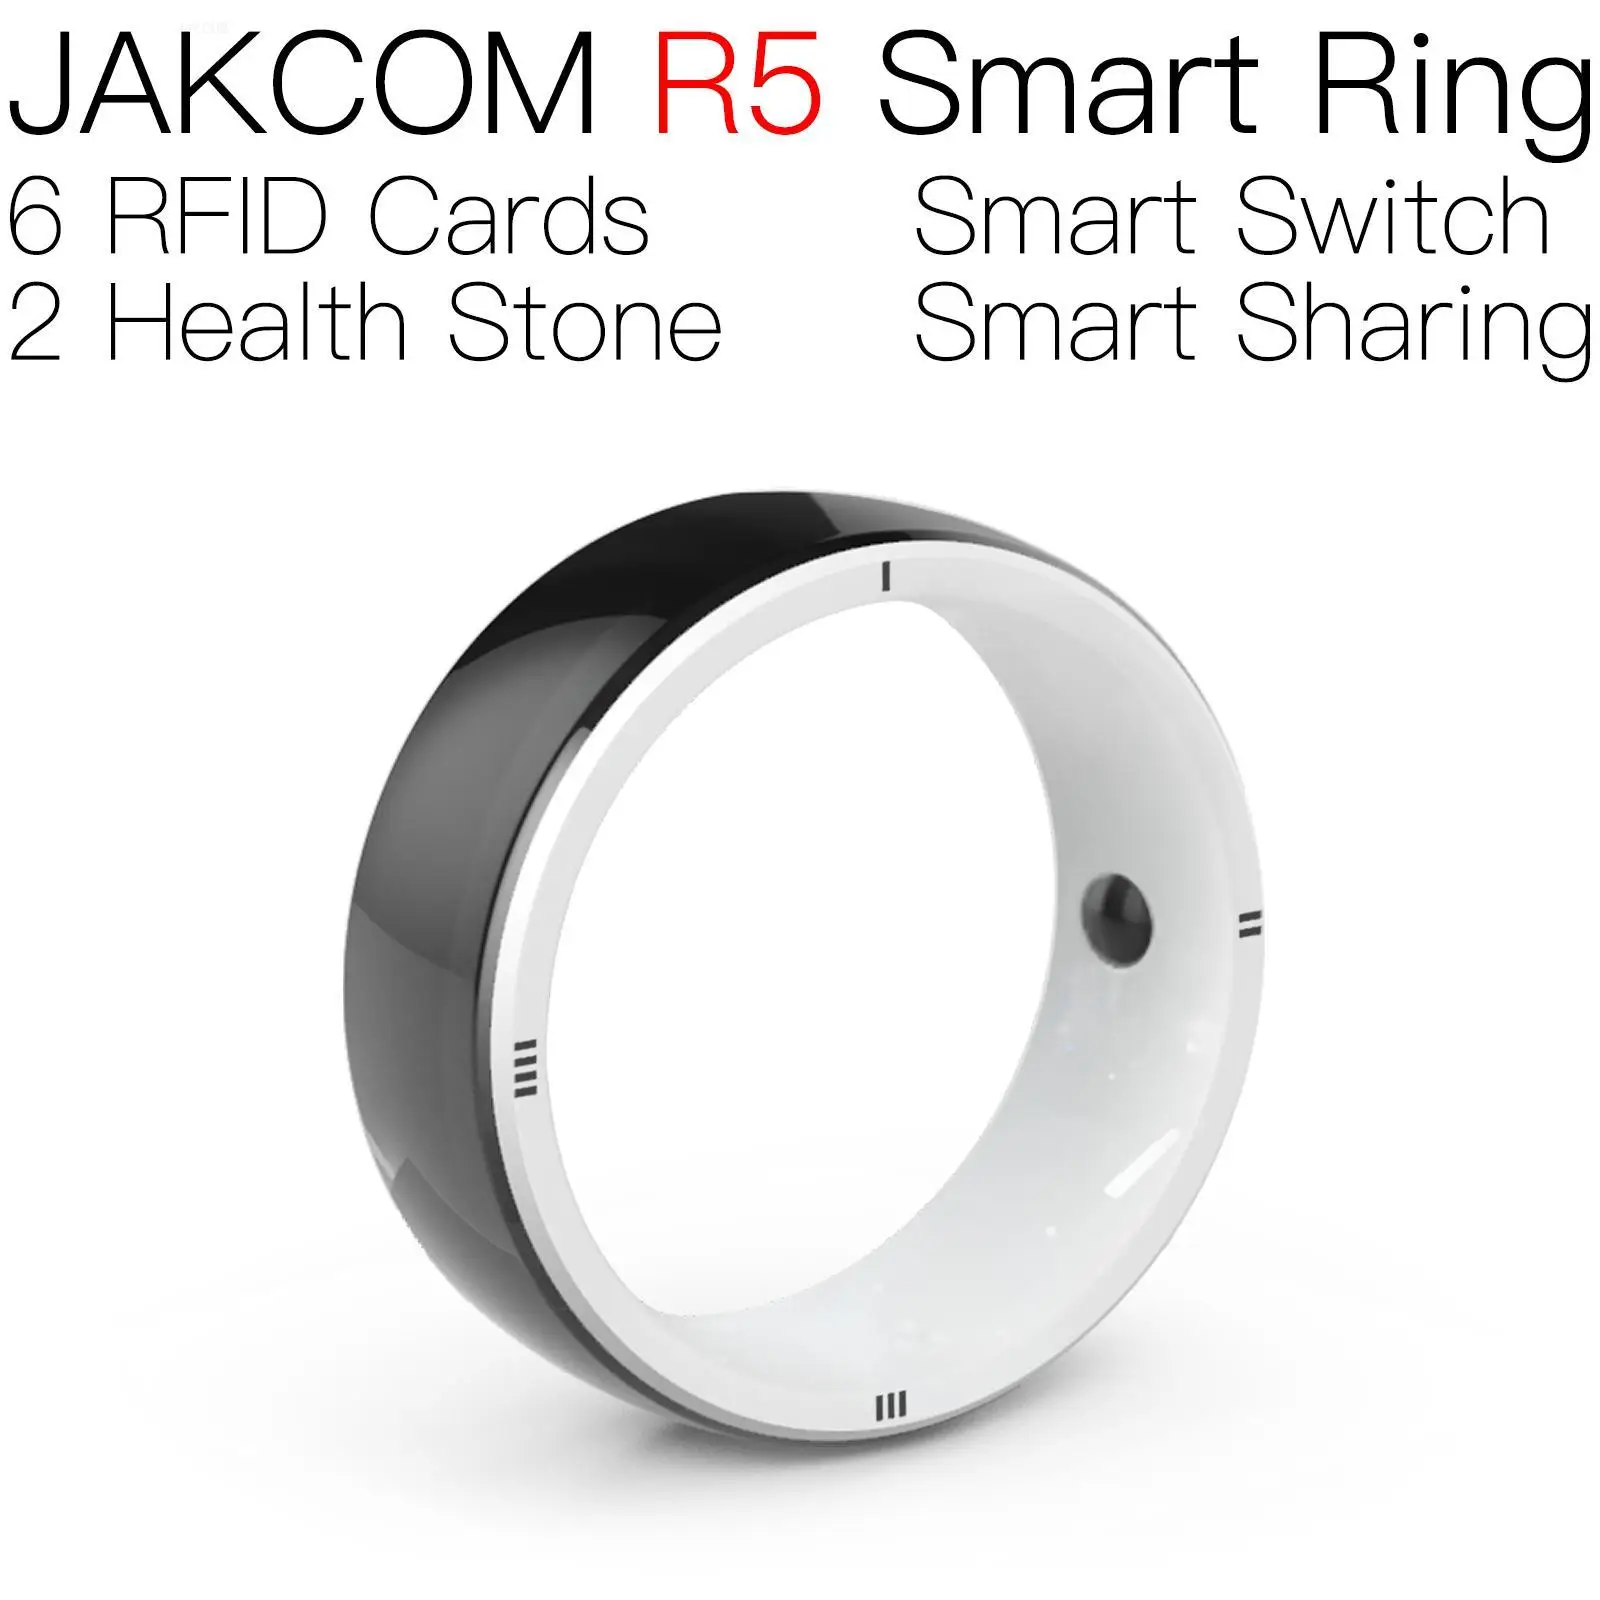 

JAKCOM R5 Smart Ring Match to t5577 card rfid metal tag 125 khz coil sticker for access nfc protection call 4442 copy chip pvc